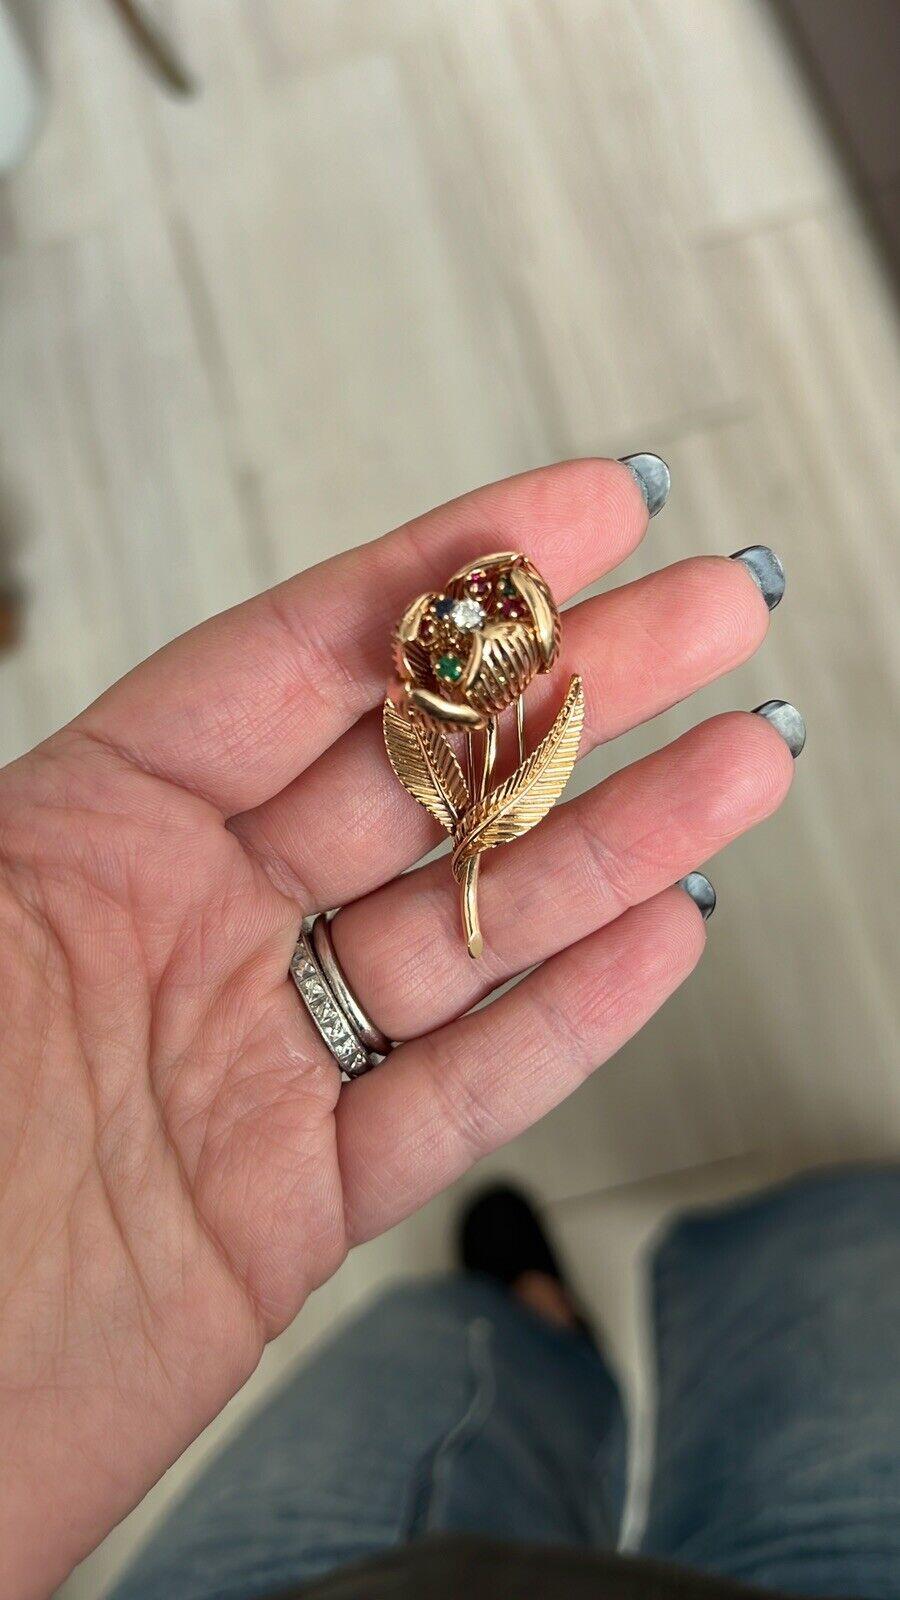 Mellerio Paris 18k Yellow Gold, Diamond & Multi Gemstone Tremblant Flower Clip Brooch Vintage

Here is your chance to purchase a beautiful and highly collectible designer clip brooch.  

The brooch is made in France by Mellerio, and is circa 1950s. 